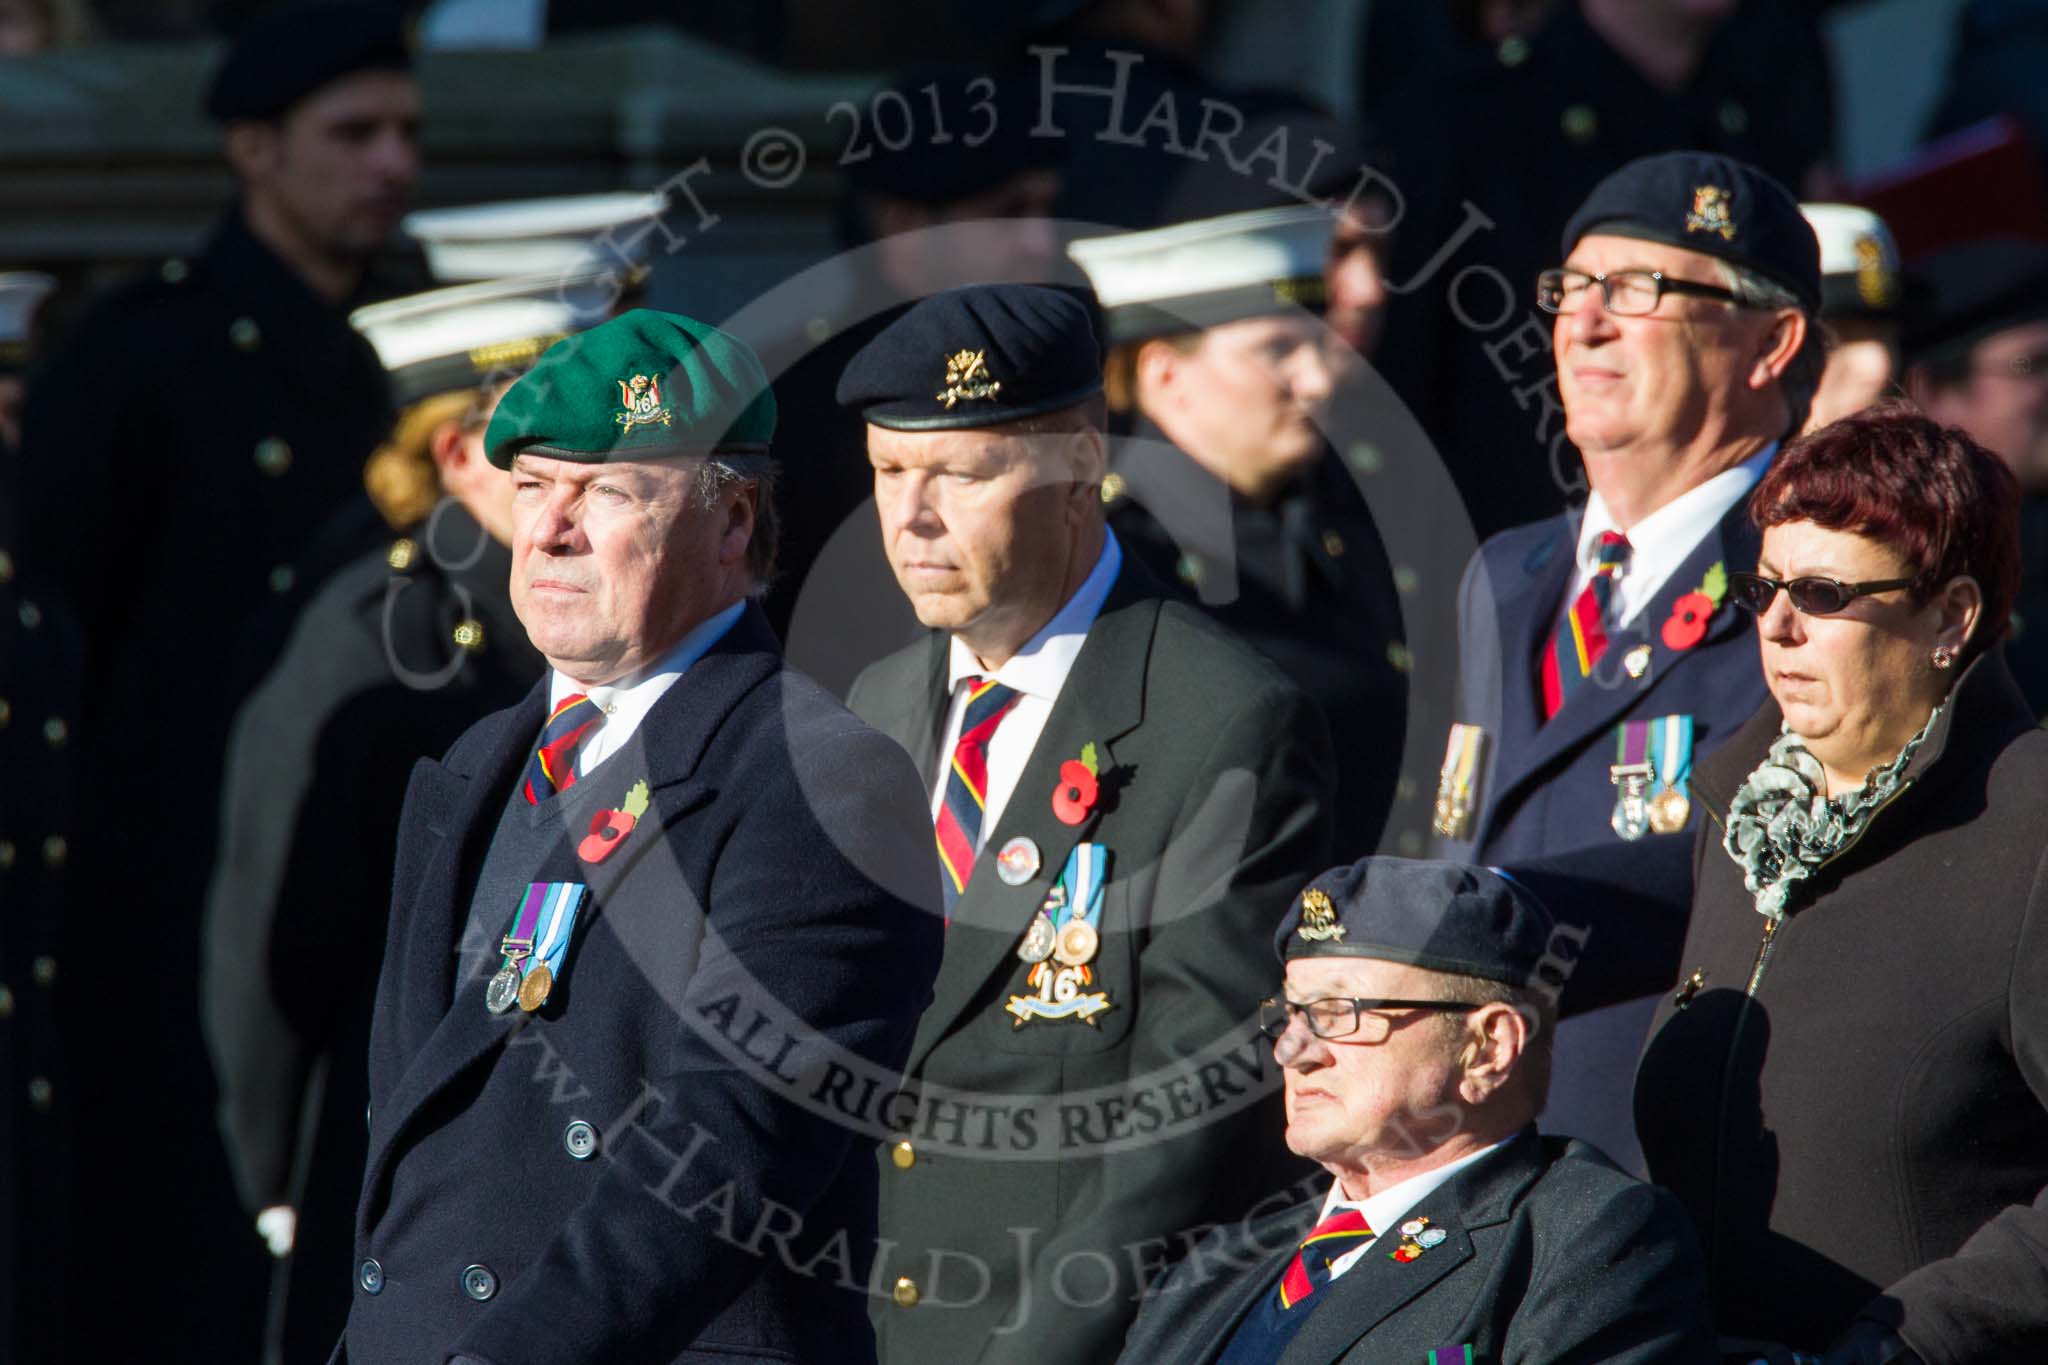 Remembrance Sunday at the Cenotaph in London 2014: Group B29 - Queen's Royal Hussars (The Queen's Own & Royal Irish).
Press stand opposite the Foreign Office building, Whitehall, London SW1,
London,
Greater London,
United Kingdom,
on 09 November 2014 at 12:13, image #1872